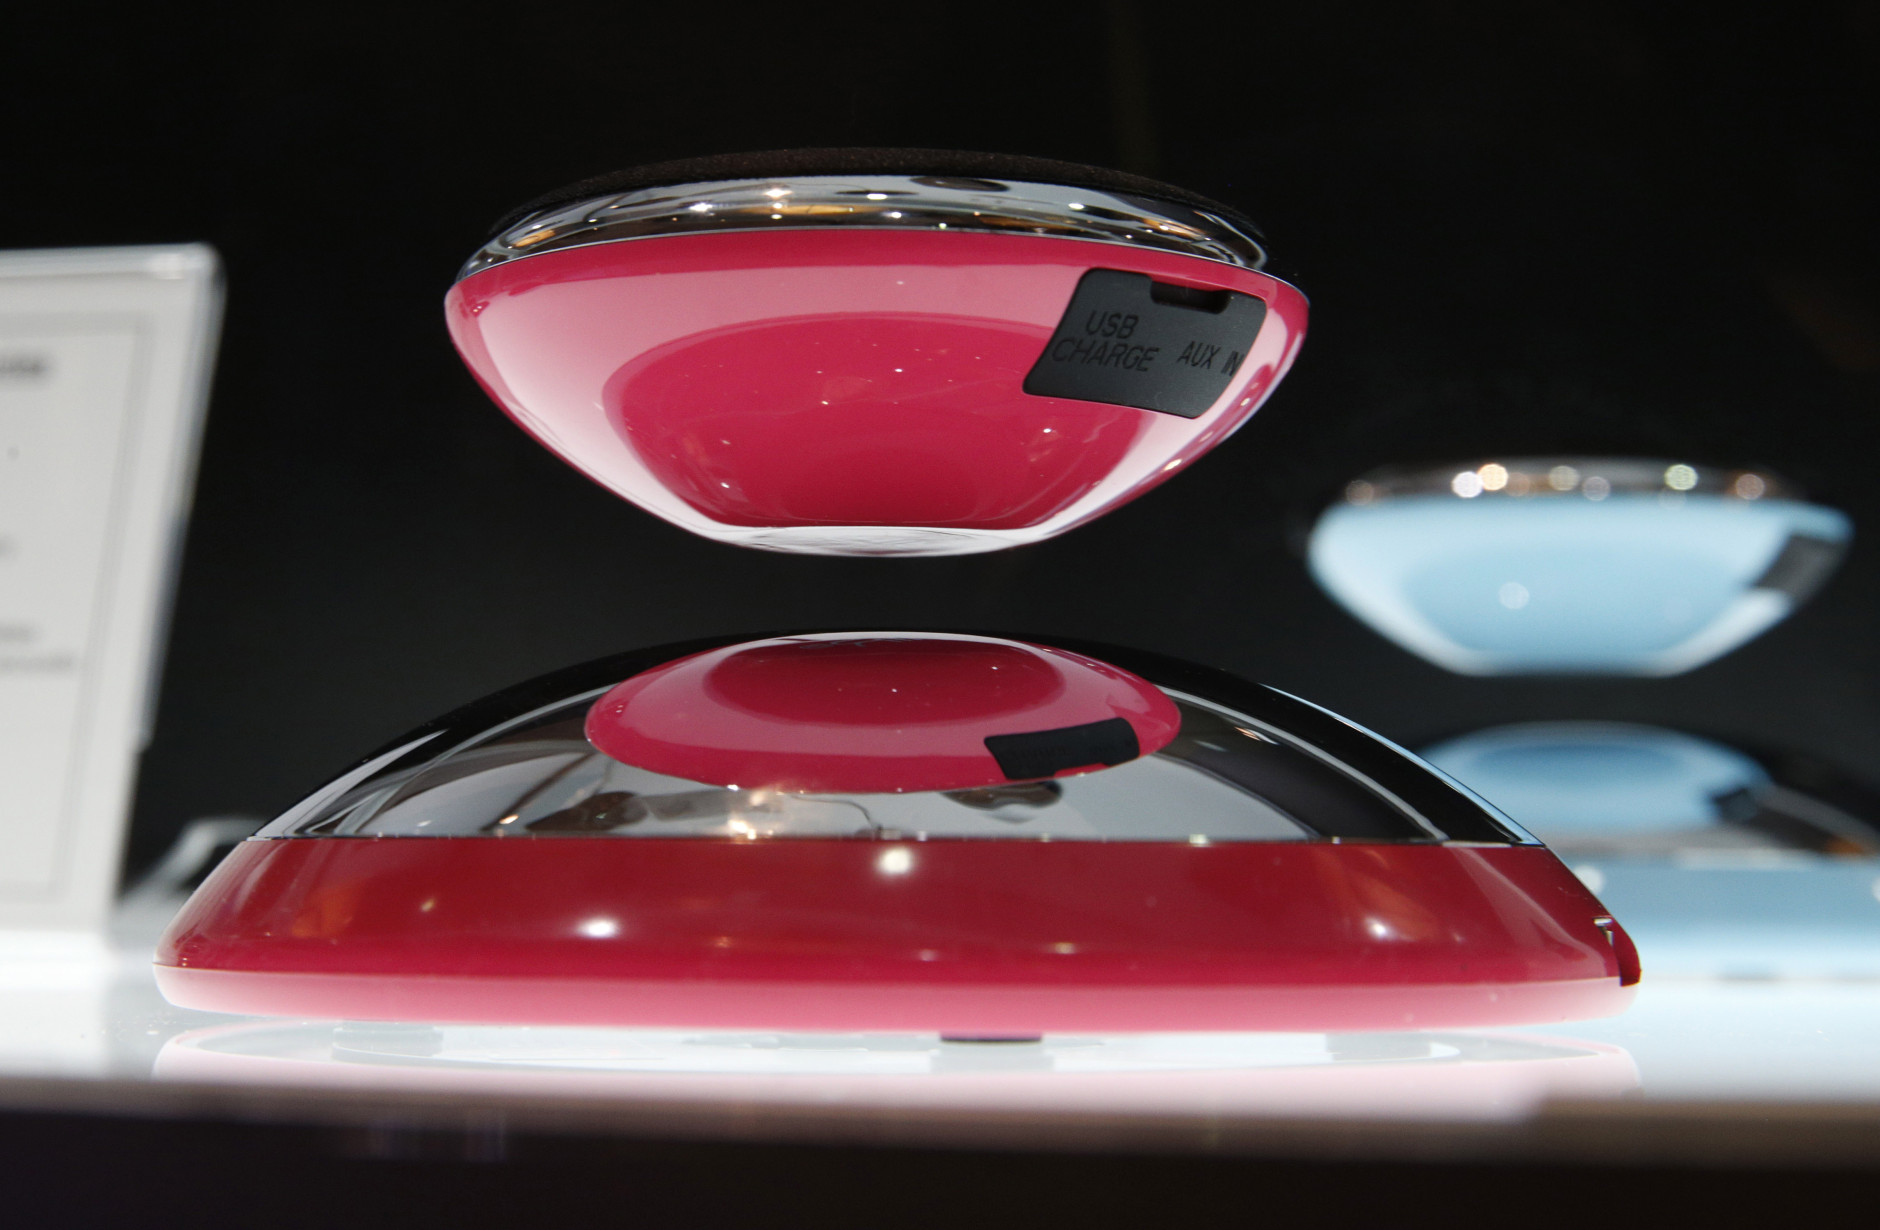 The Axxess CE Air2 is on display at CES Unveiled, a media preview event for CES International, Sunday, Jan. 4, 2015, in Las Vegas. The bluetooth speaker levitates over it's base. (AP Photo/John Locher)